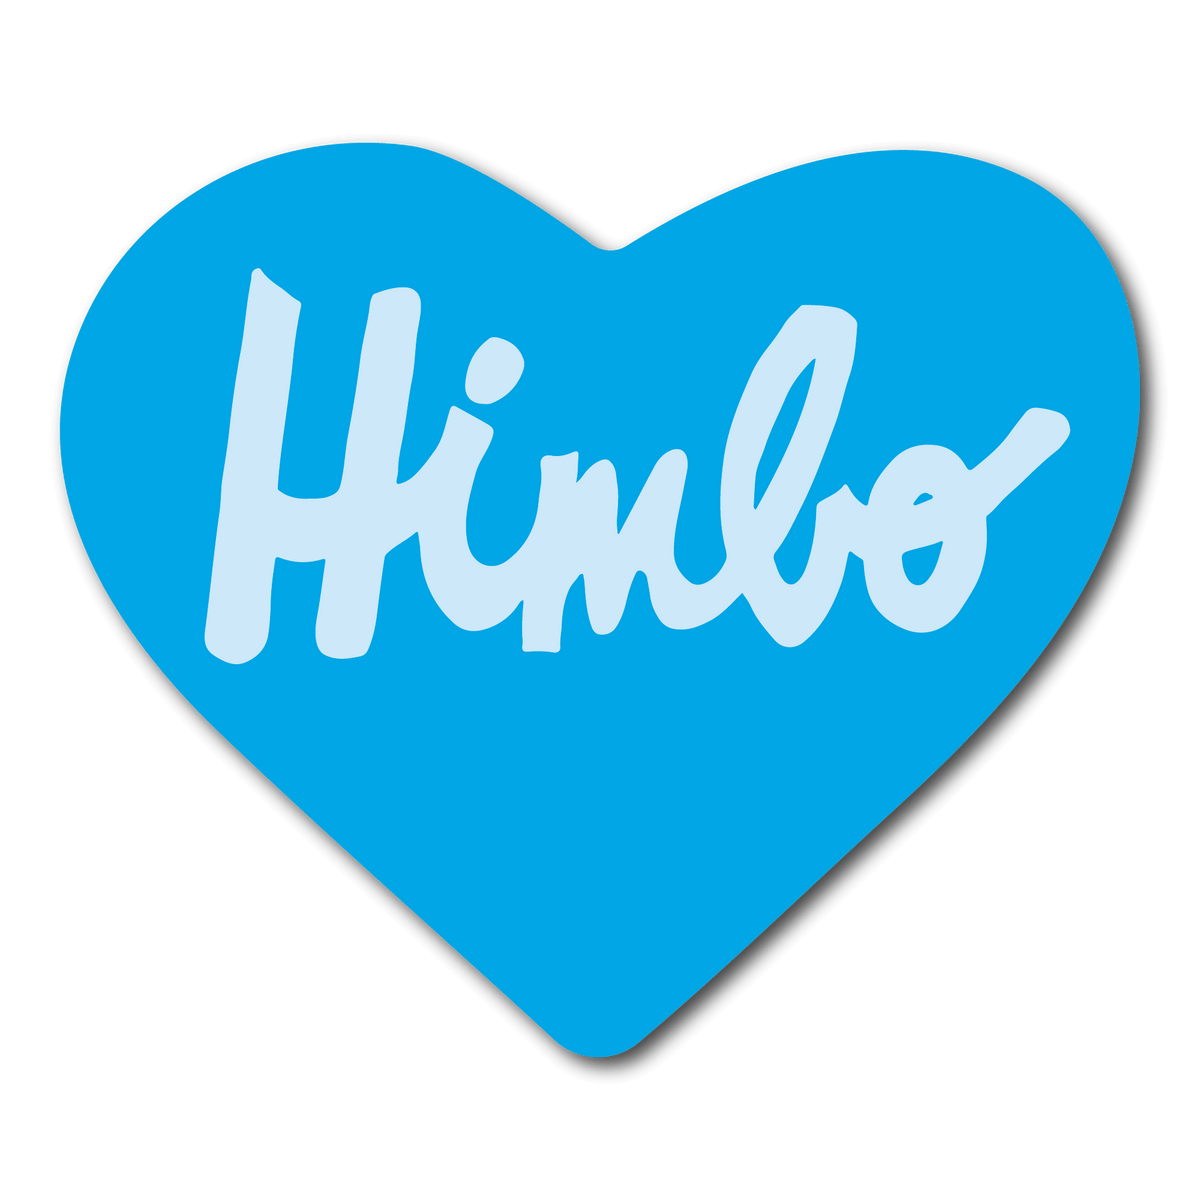 Small Blue Heart Sticker that says himbo